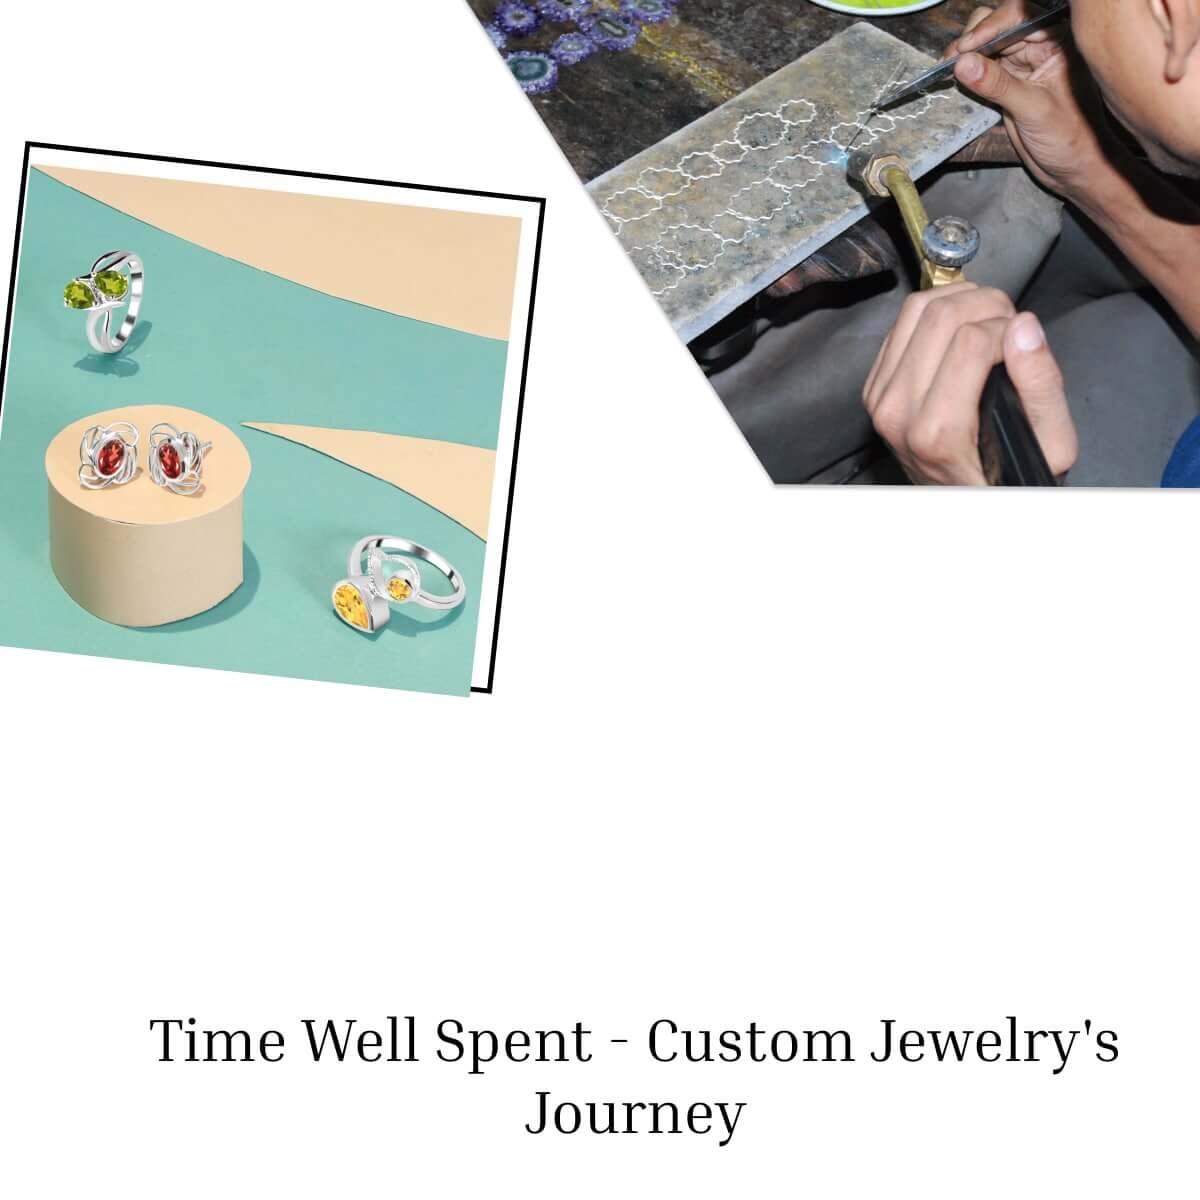 How long does making of the custom jewelry take?